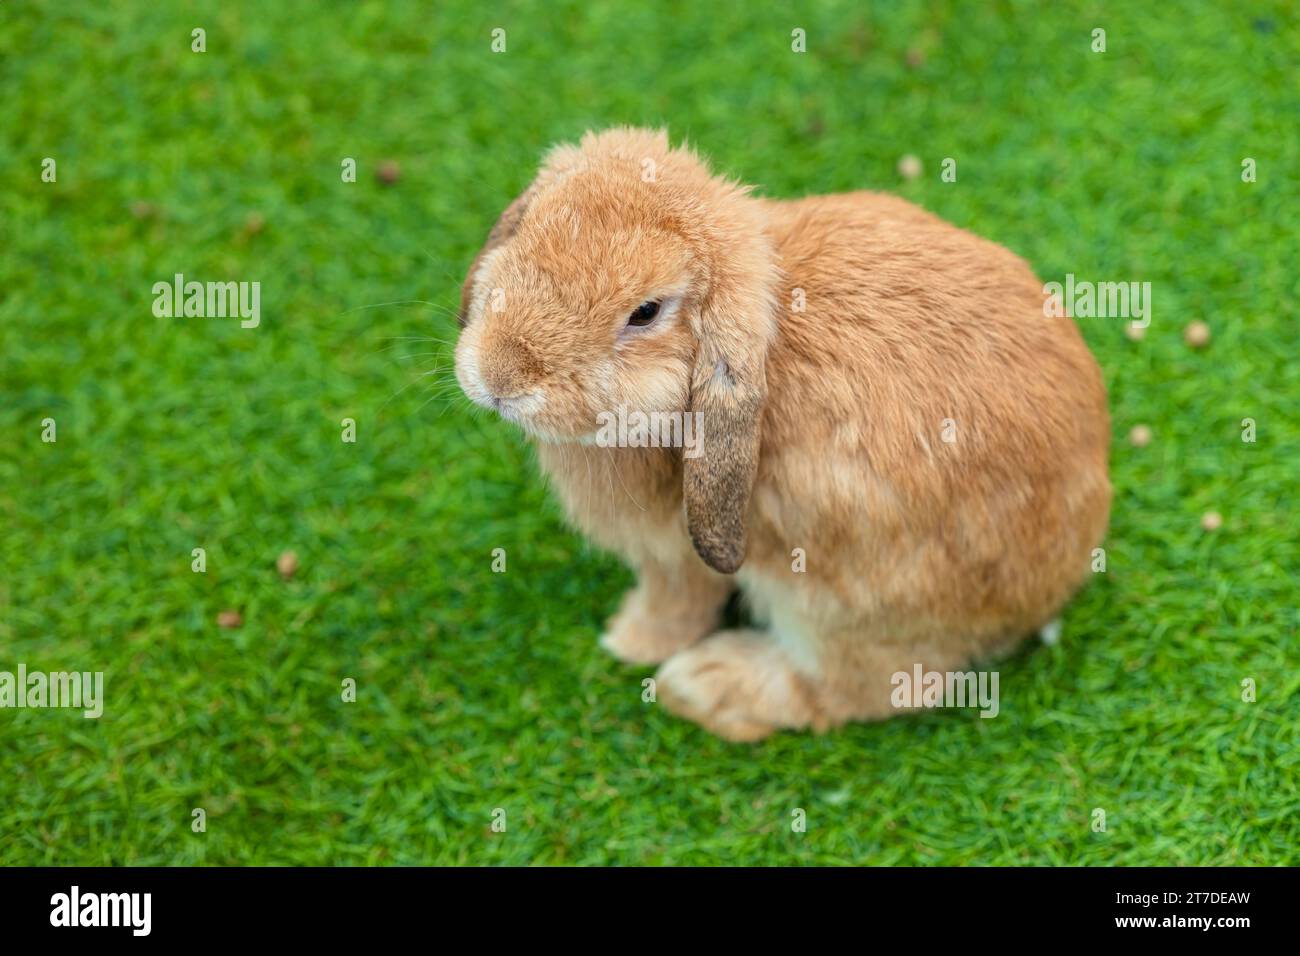 Cute Bunny domestic exotic pet, French Lop baby Rabbit single sitting on green grass field with copy space for text. Stock Photo